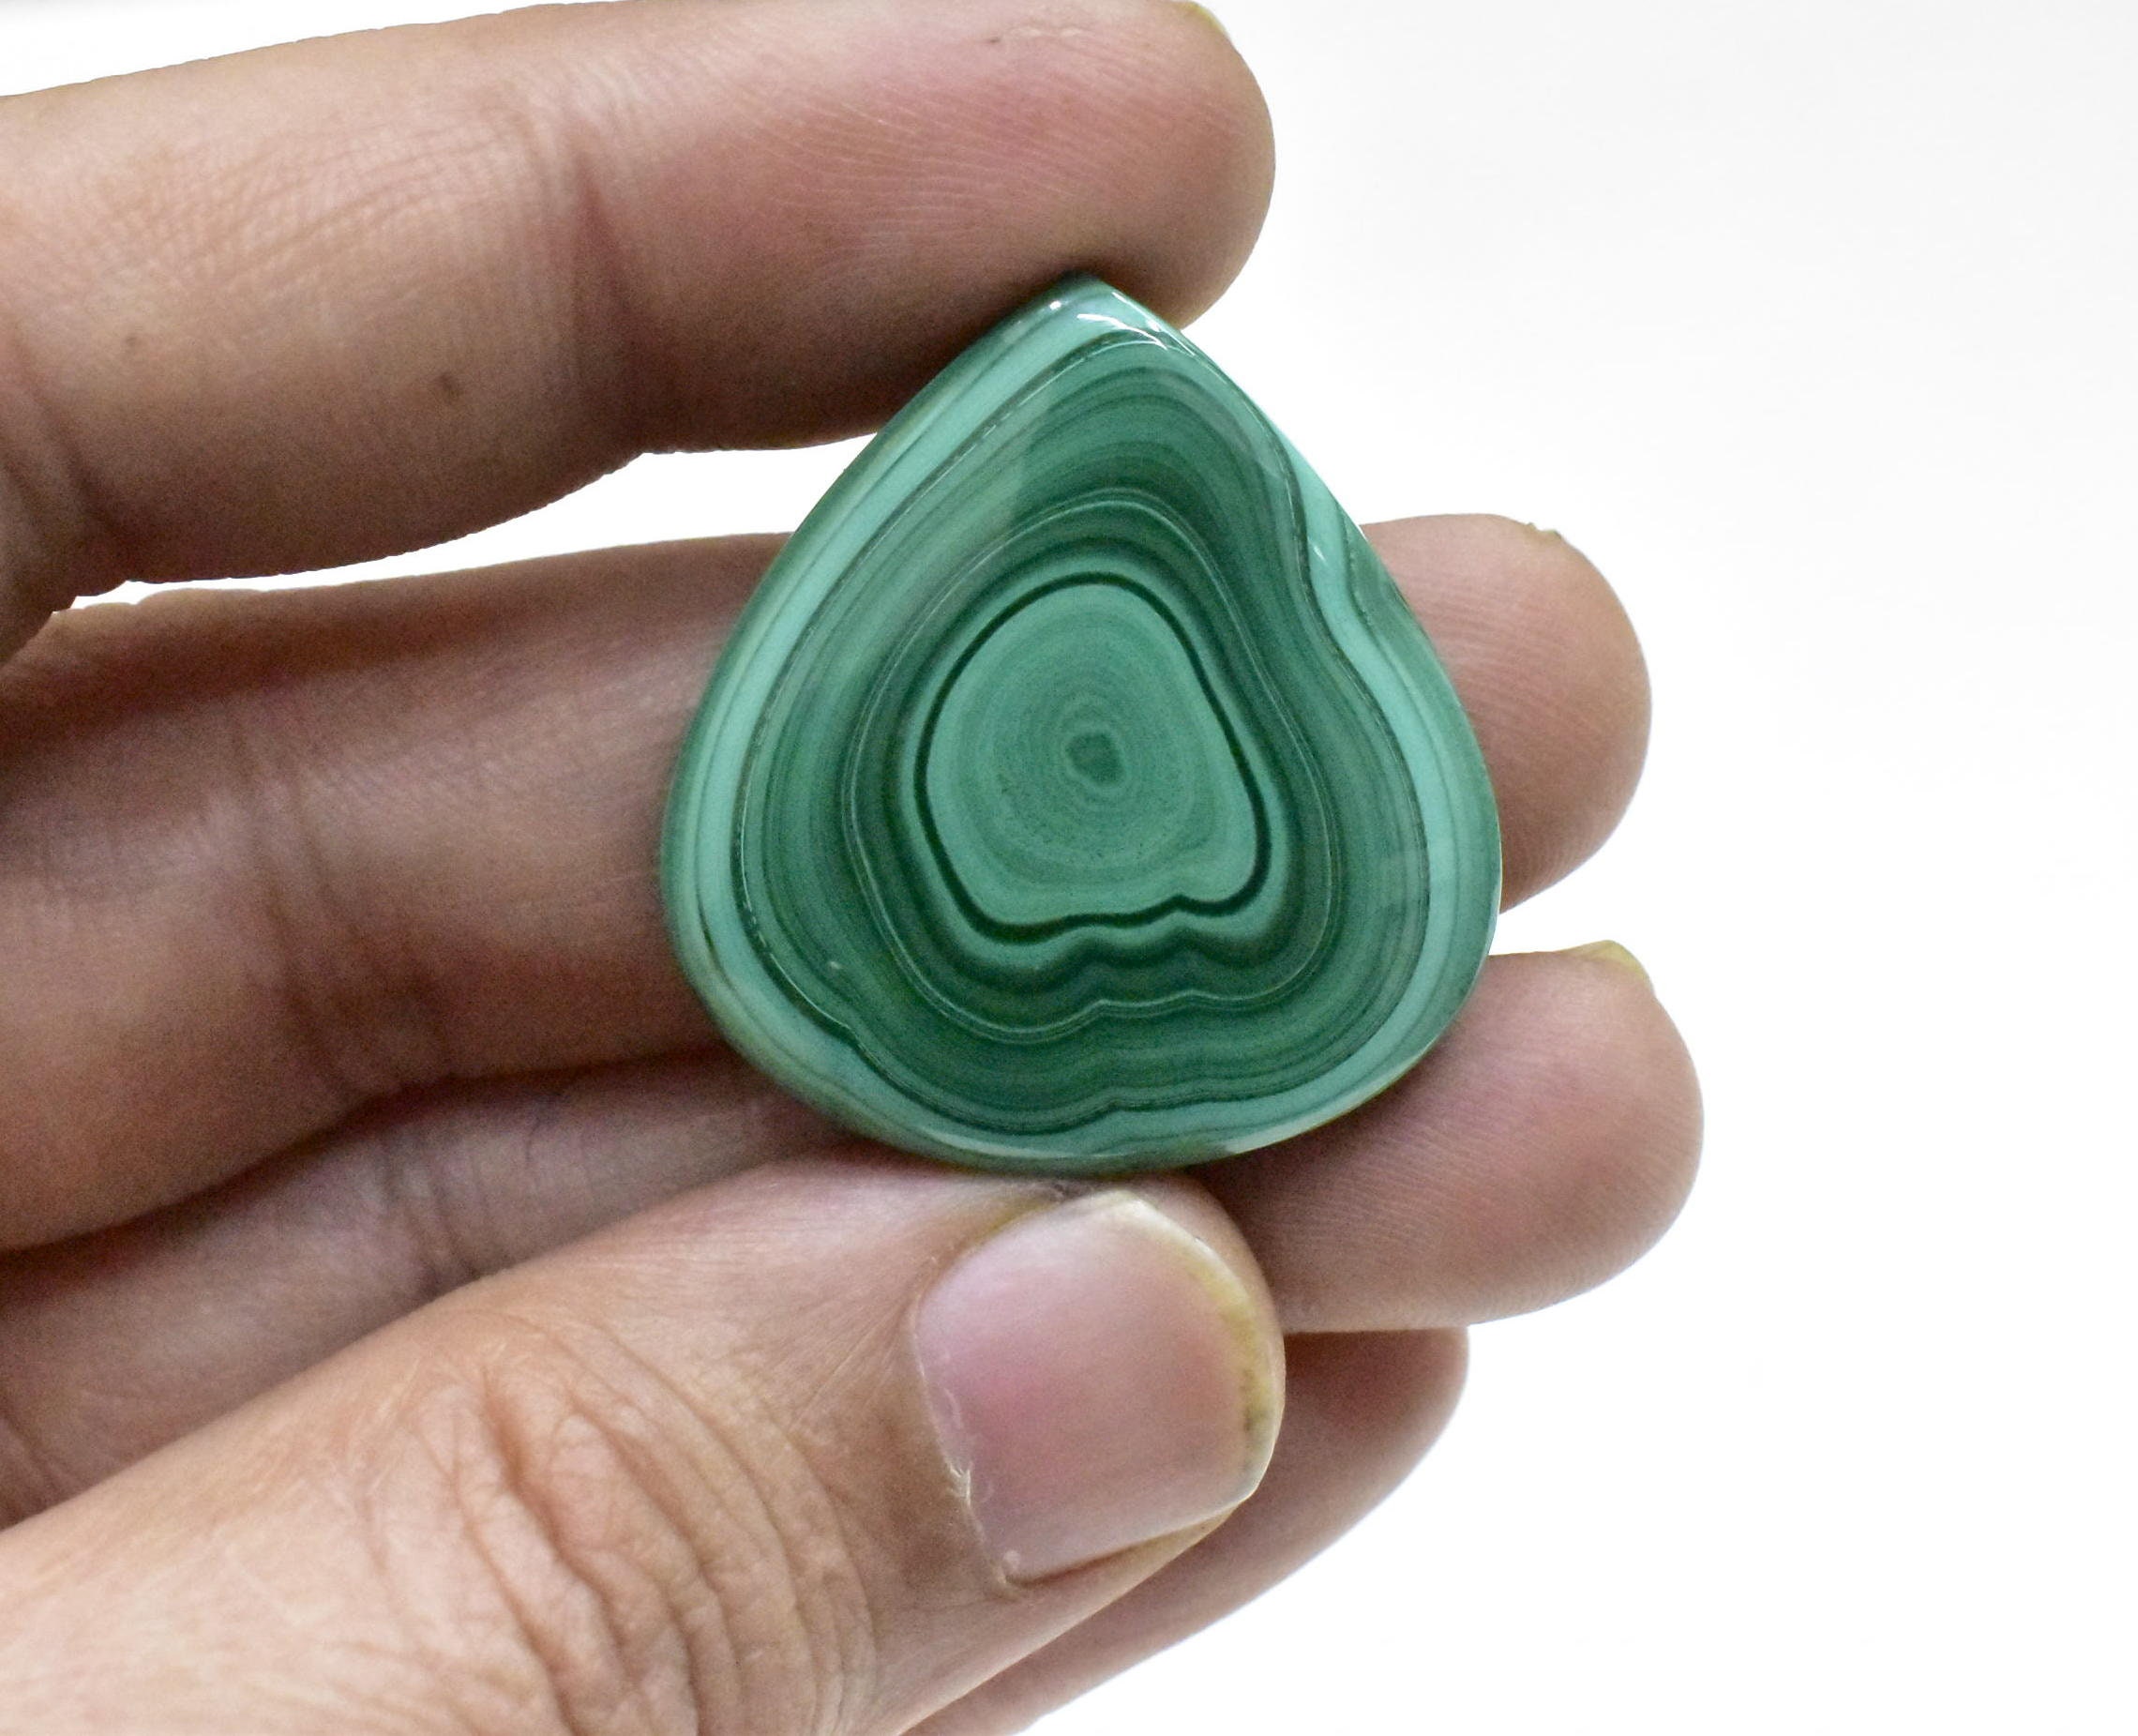 Natural Malachite Gemstone,Gemstone Cabochon,New Year Gift,Christmas Gift,Gift For Her,Mother’s Day Gift,Making For Jewellery,Gemstone Cab. | Save 33% - Rajasthan Living 10